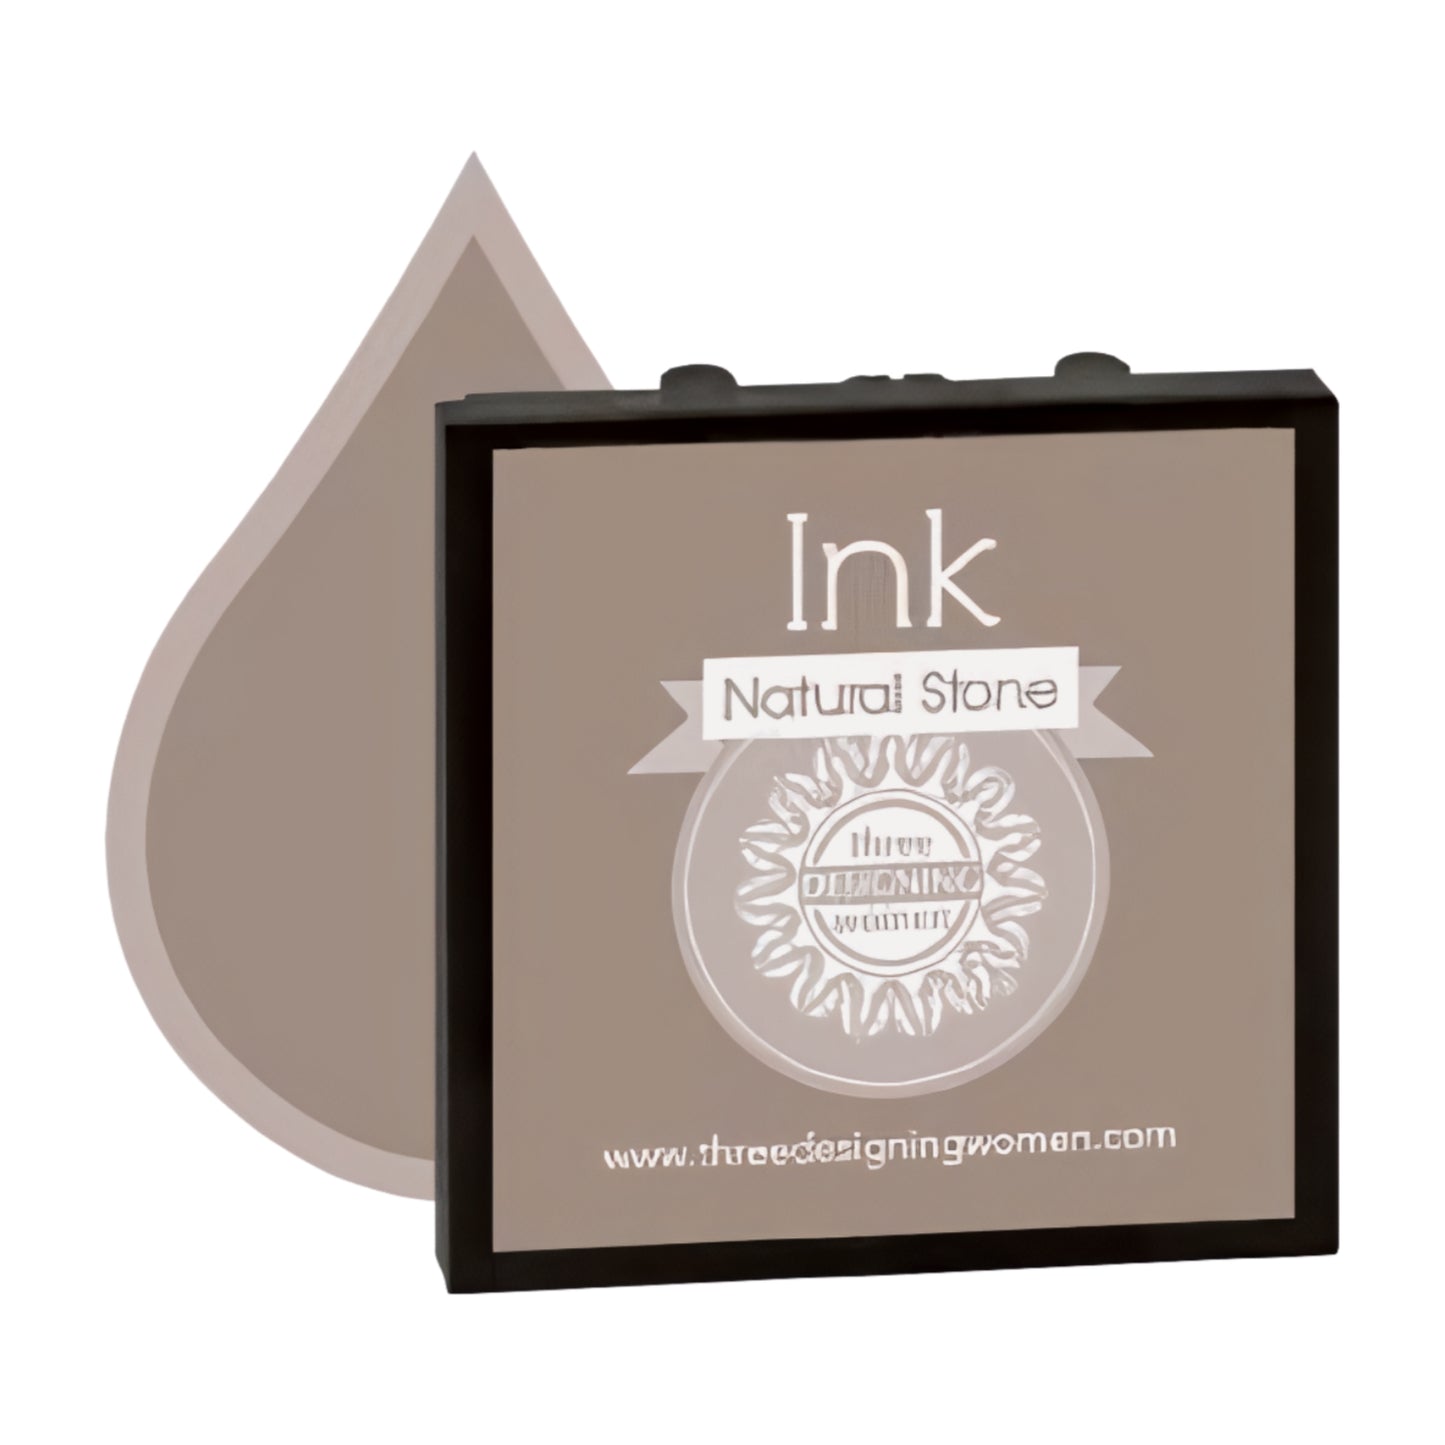 Ink Replacement Cartridge "Natural Stone" for Self-Inking Stampers Three Designing Women